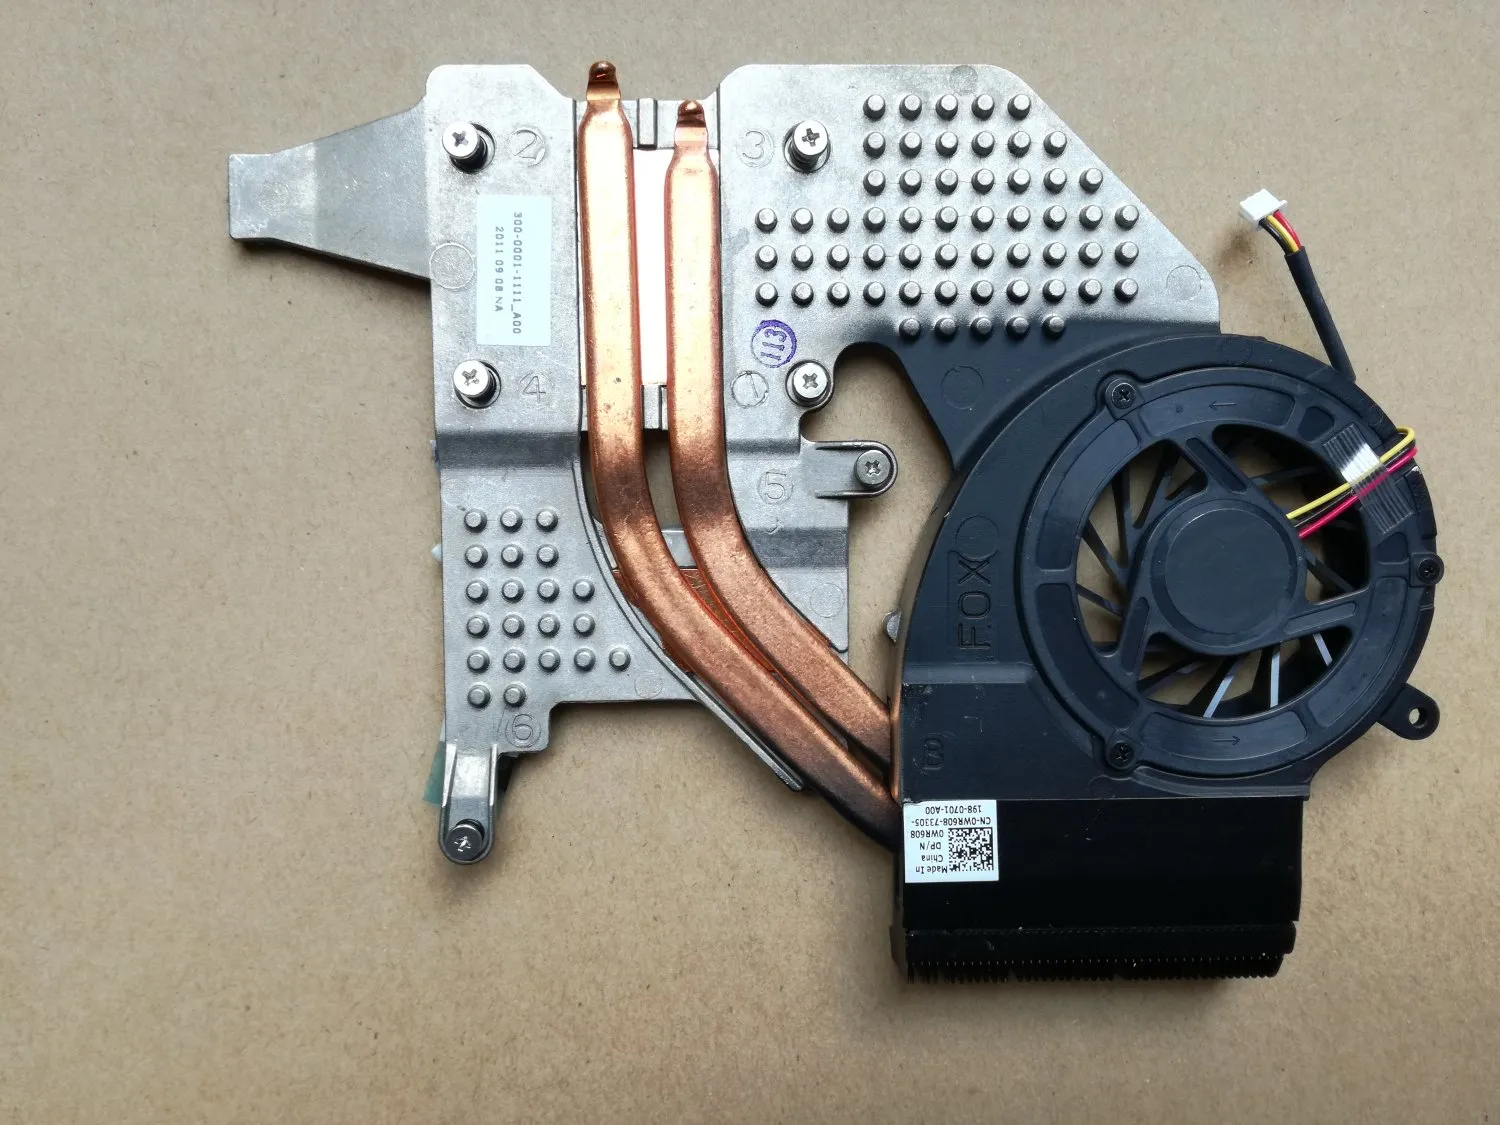 NEW cooler For DELL STUDIO 1457 1458 cooling Heatsink with Fan 0WR608 WR608